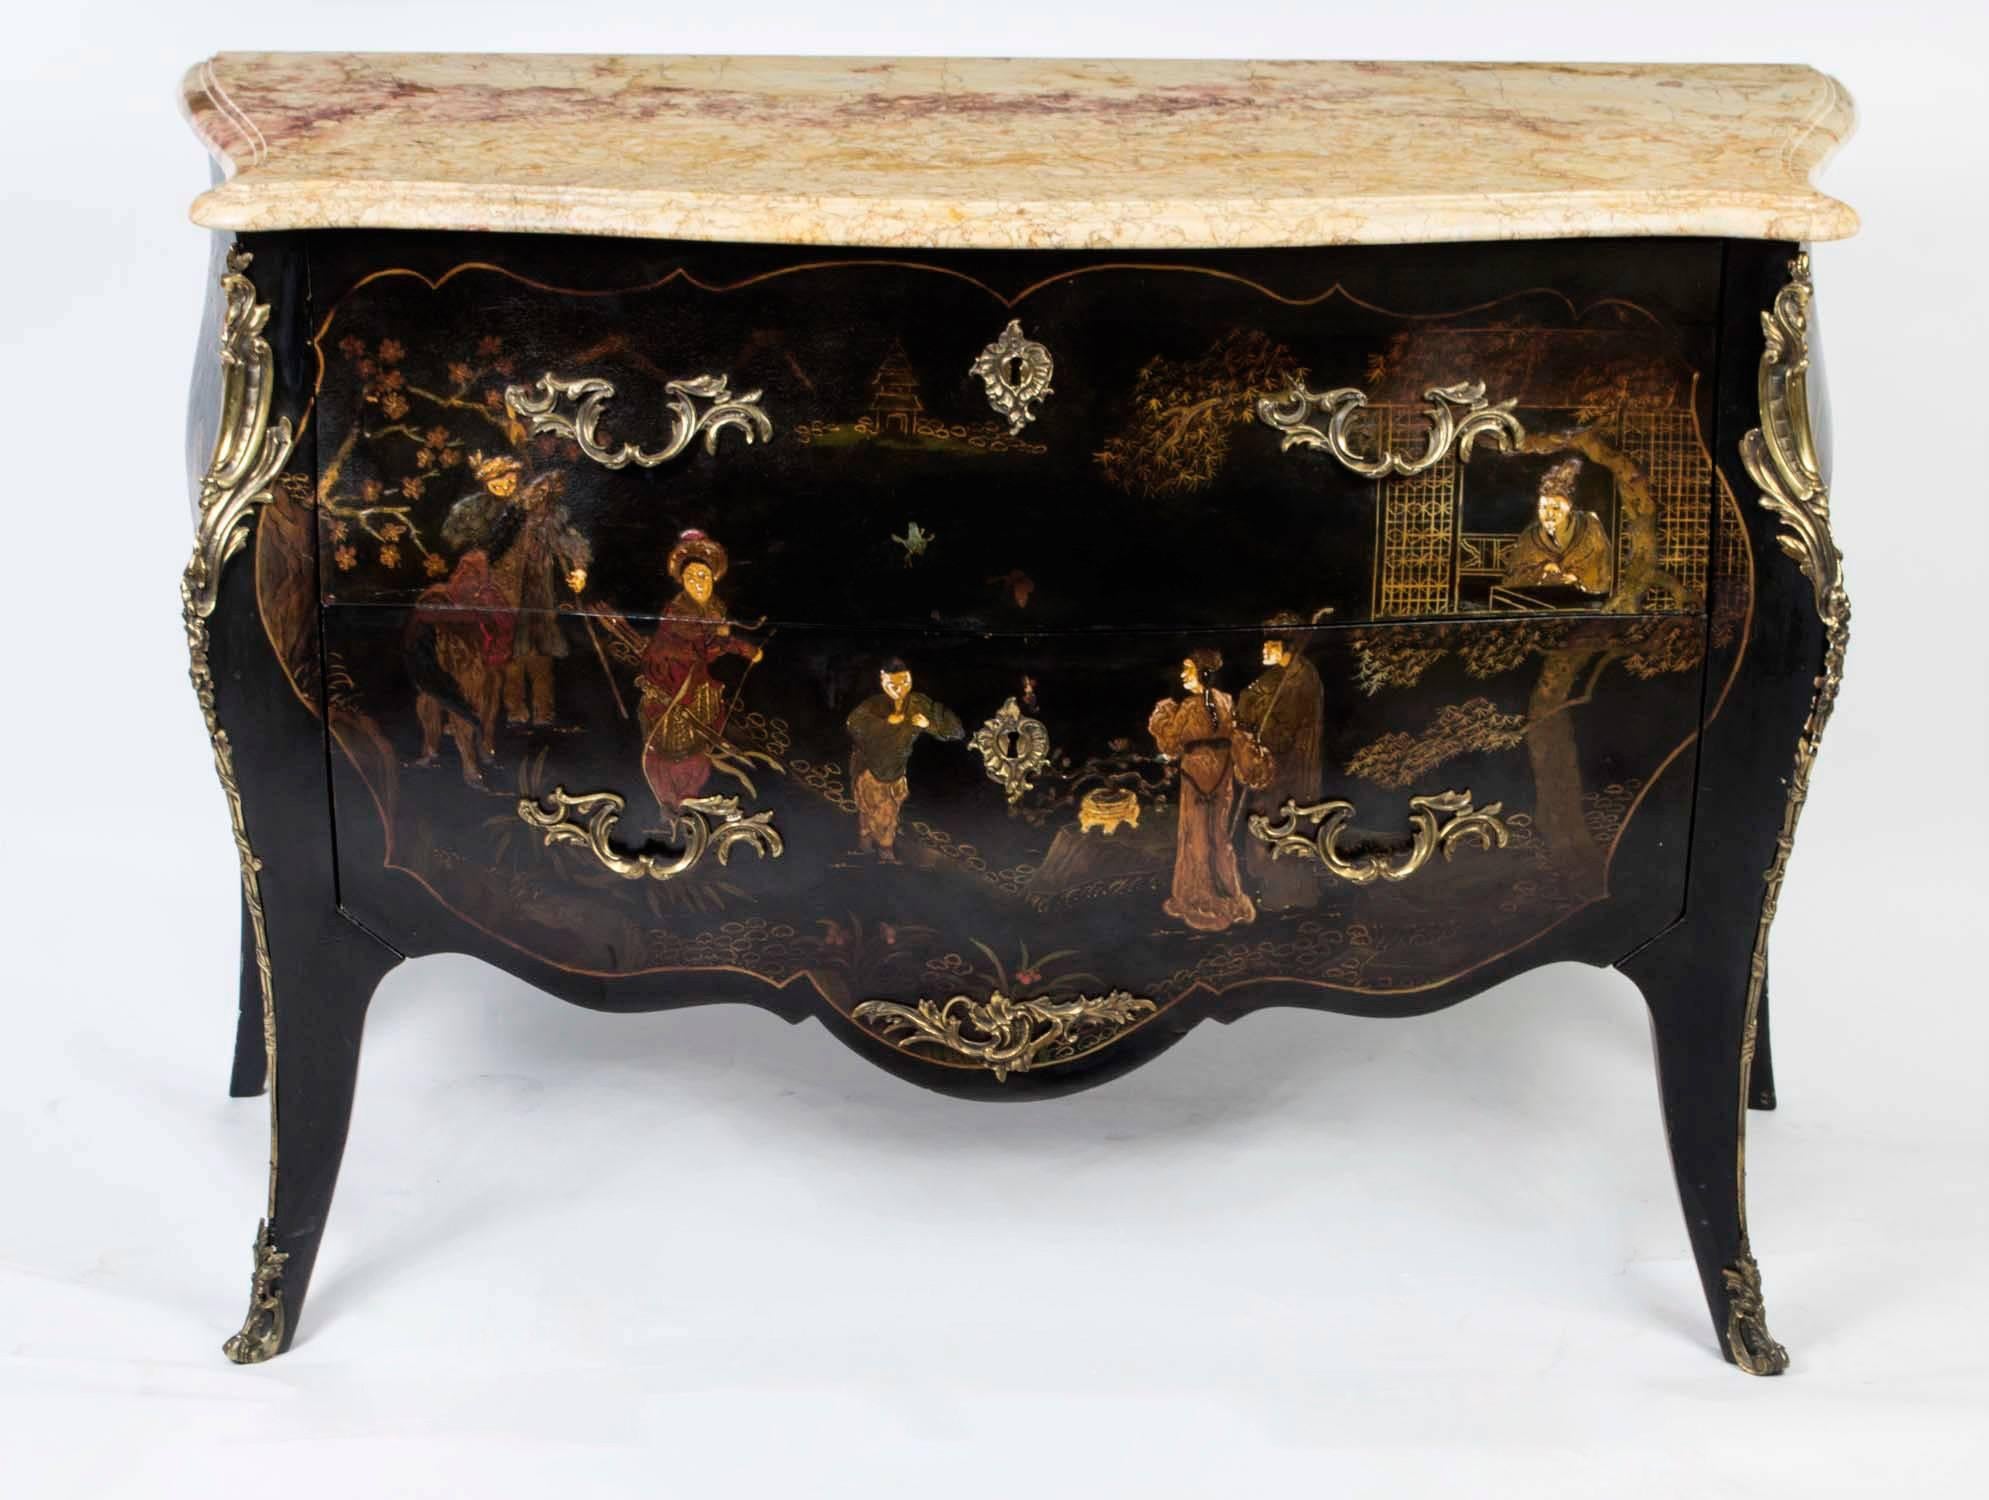 This is a stunning antique French bombe' Chinoiserie black lacquered commode, in Louis XV style, circa 1880 in date. 

It has the most wonderful ormolu mounts a breathtaking 'Marmo di Siena' marble top and fabulous Chinoiserie decoration. 

It